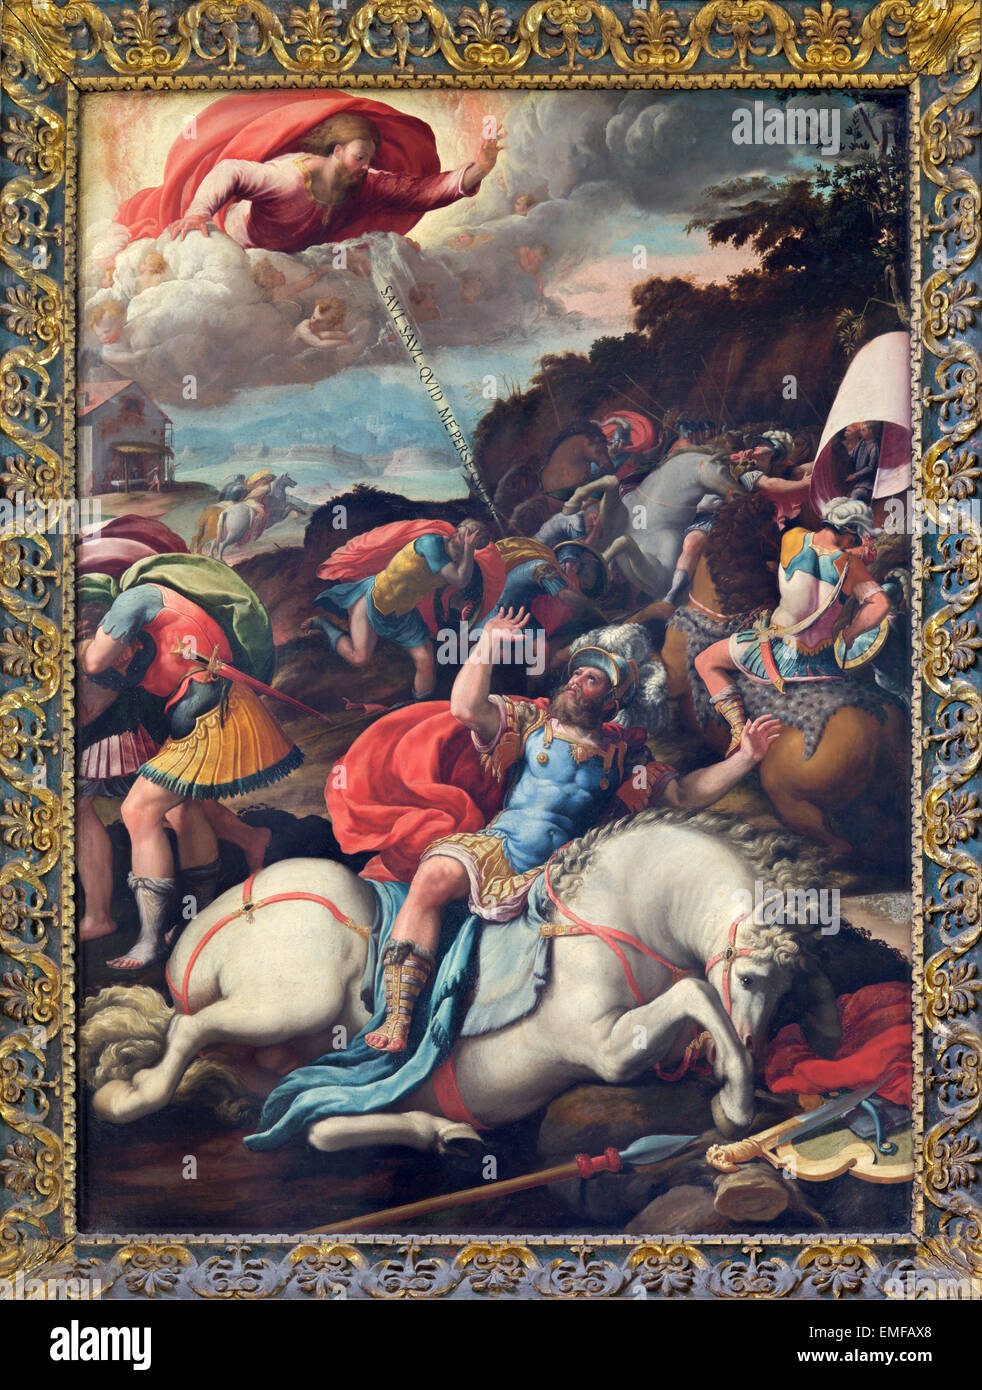 ROME, ITALY - MARCH 25, 2015: The Conversion of st. Paul painting of Marco da Siena (1545) in church Santo Spirito in Sassia. Stock Photo